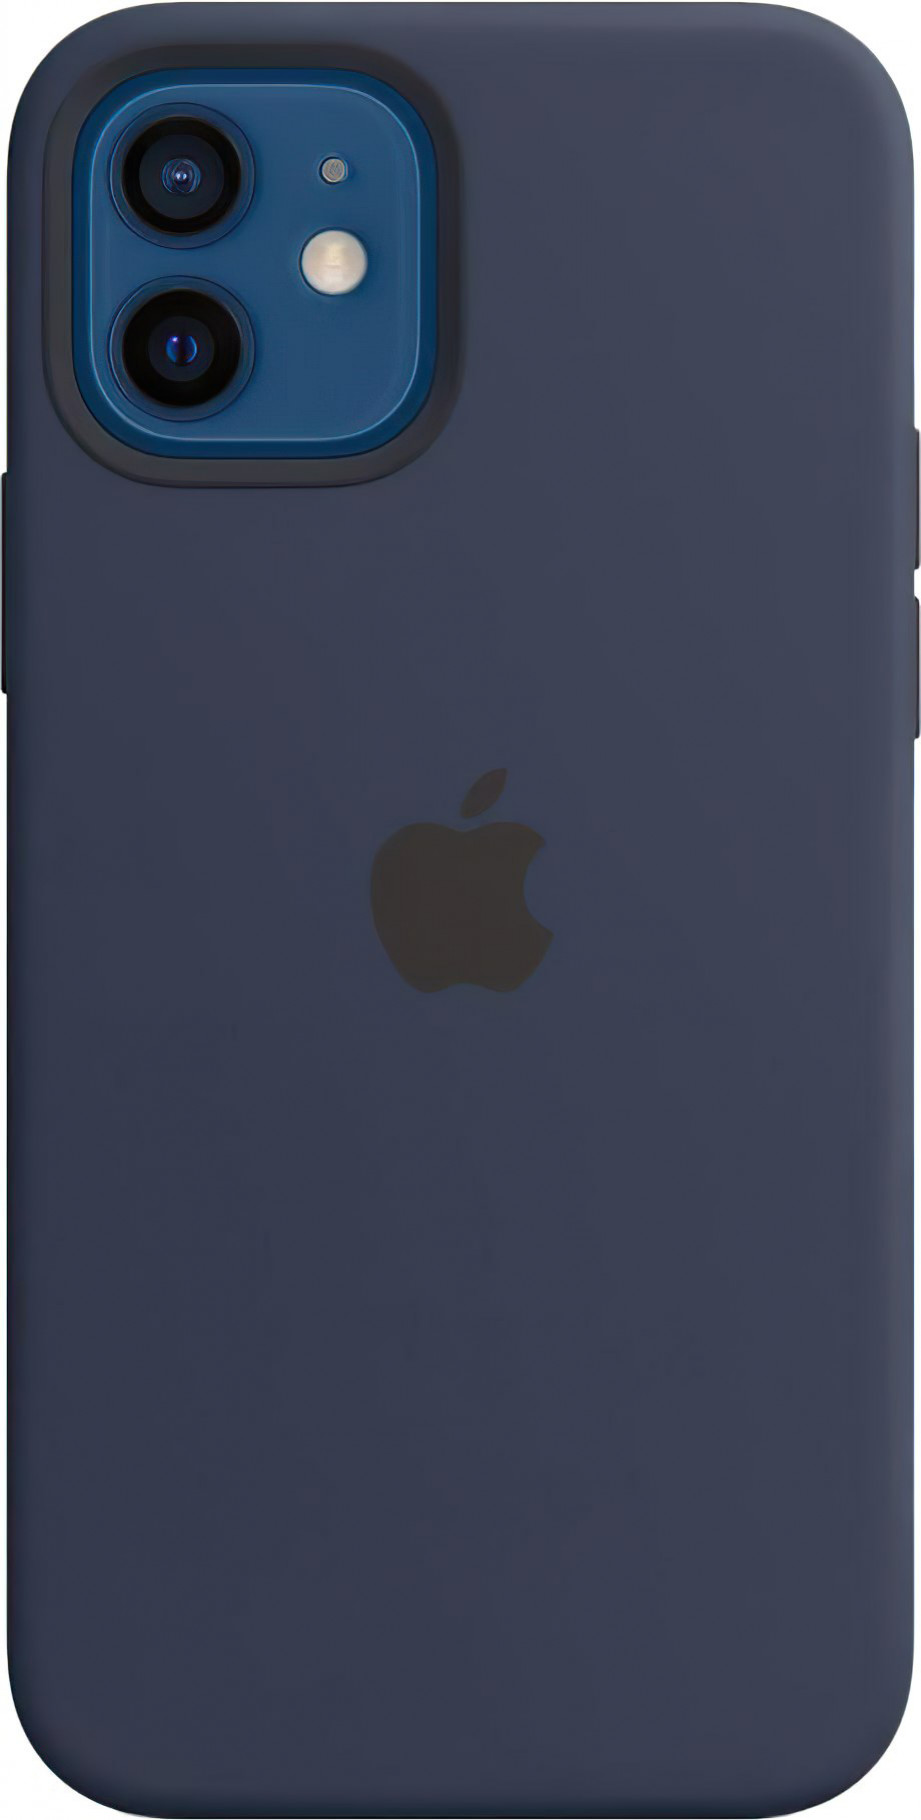 Apple iPhone 12/12 Pro Silicone Case with MagSafe - Deep Navy (MHL43) - зображення 1